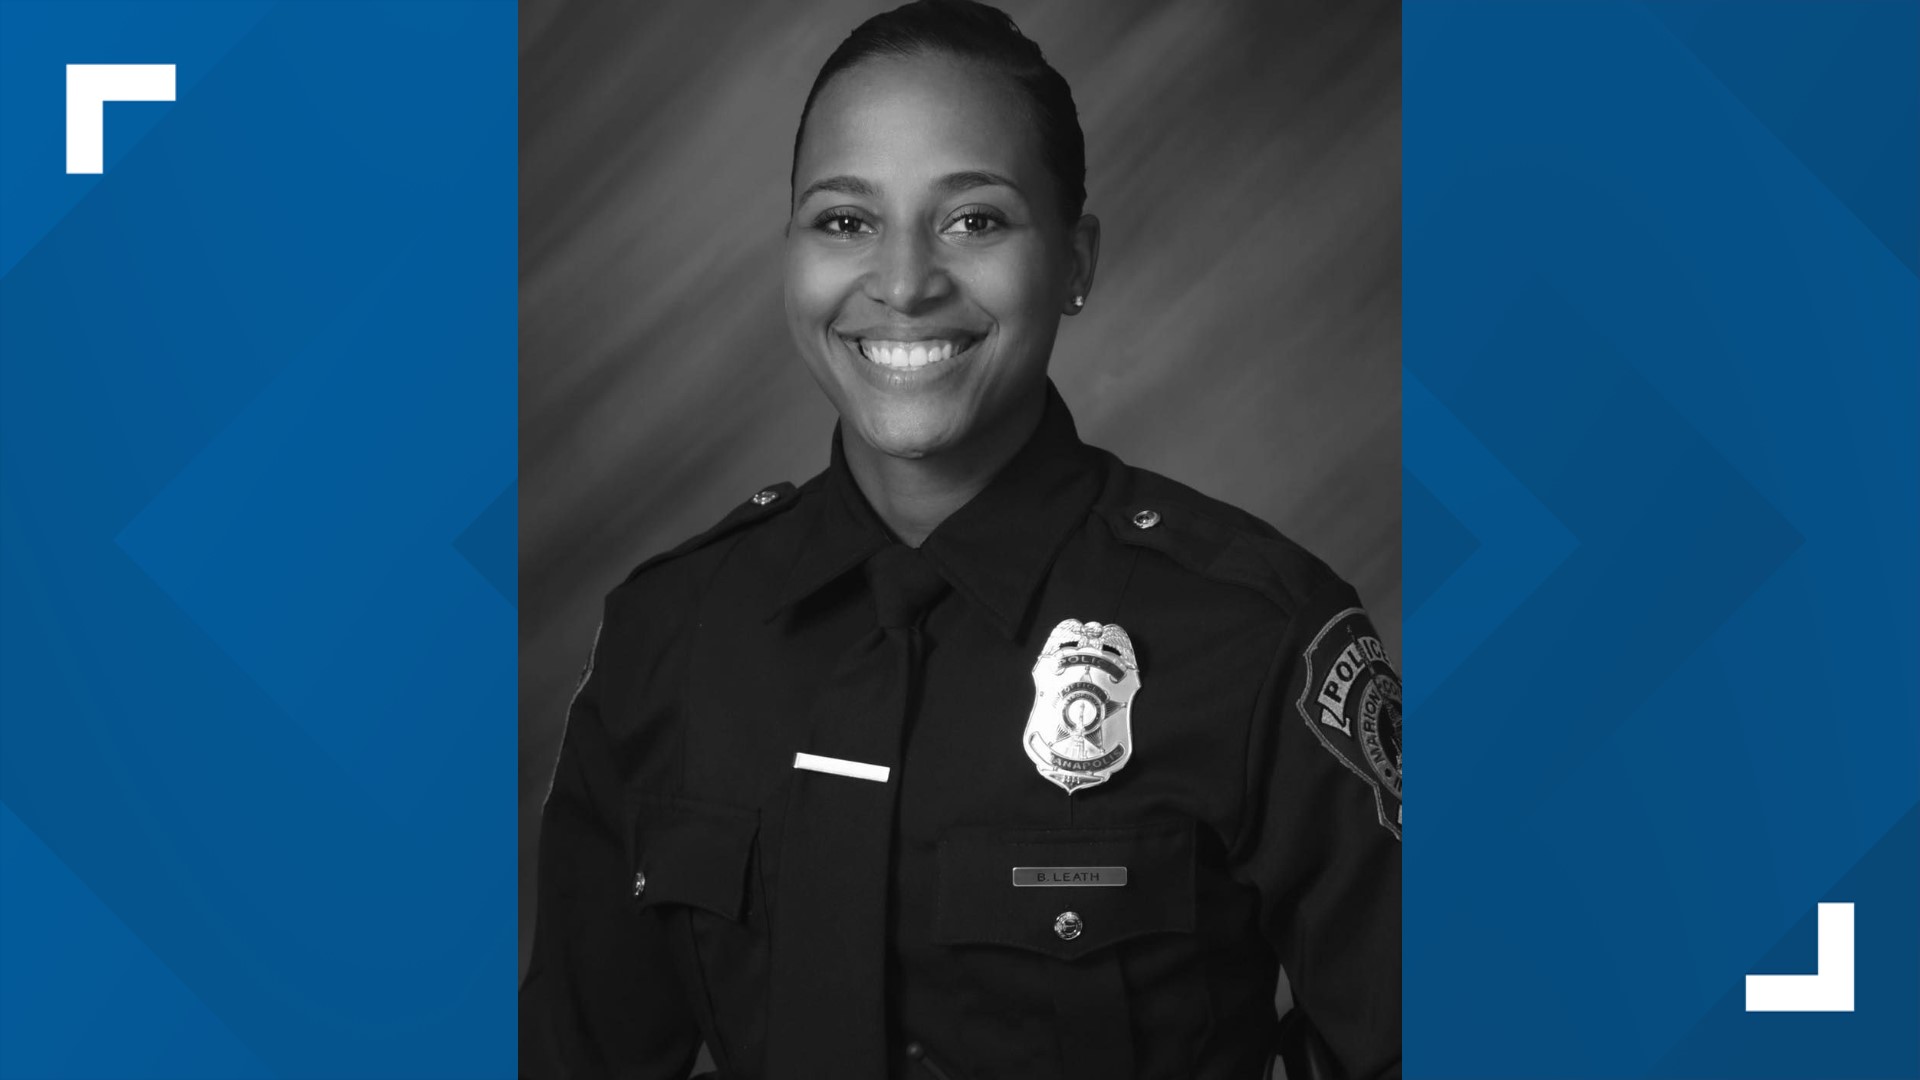 Officer Breann Leath may be gone, but IMPD as well as state and U.S. leaders have made sure in the years since her passing that she's not forgotten.